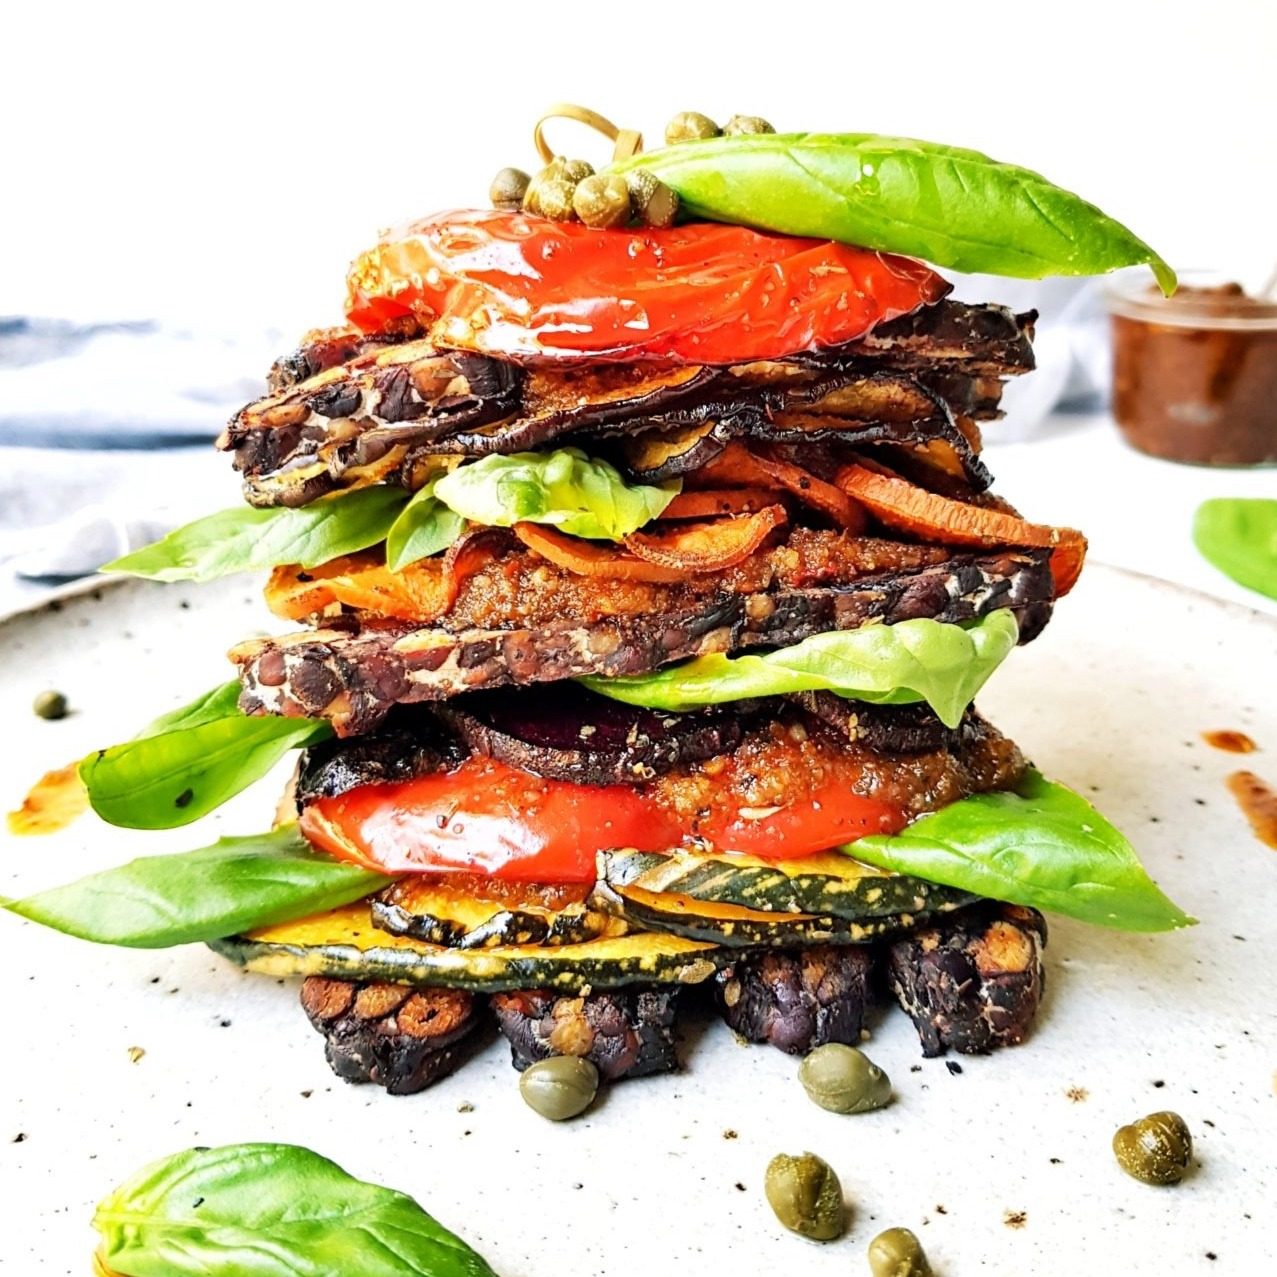 Baked tempeh and vegetable stack | Nourish plant-based living